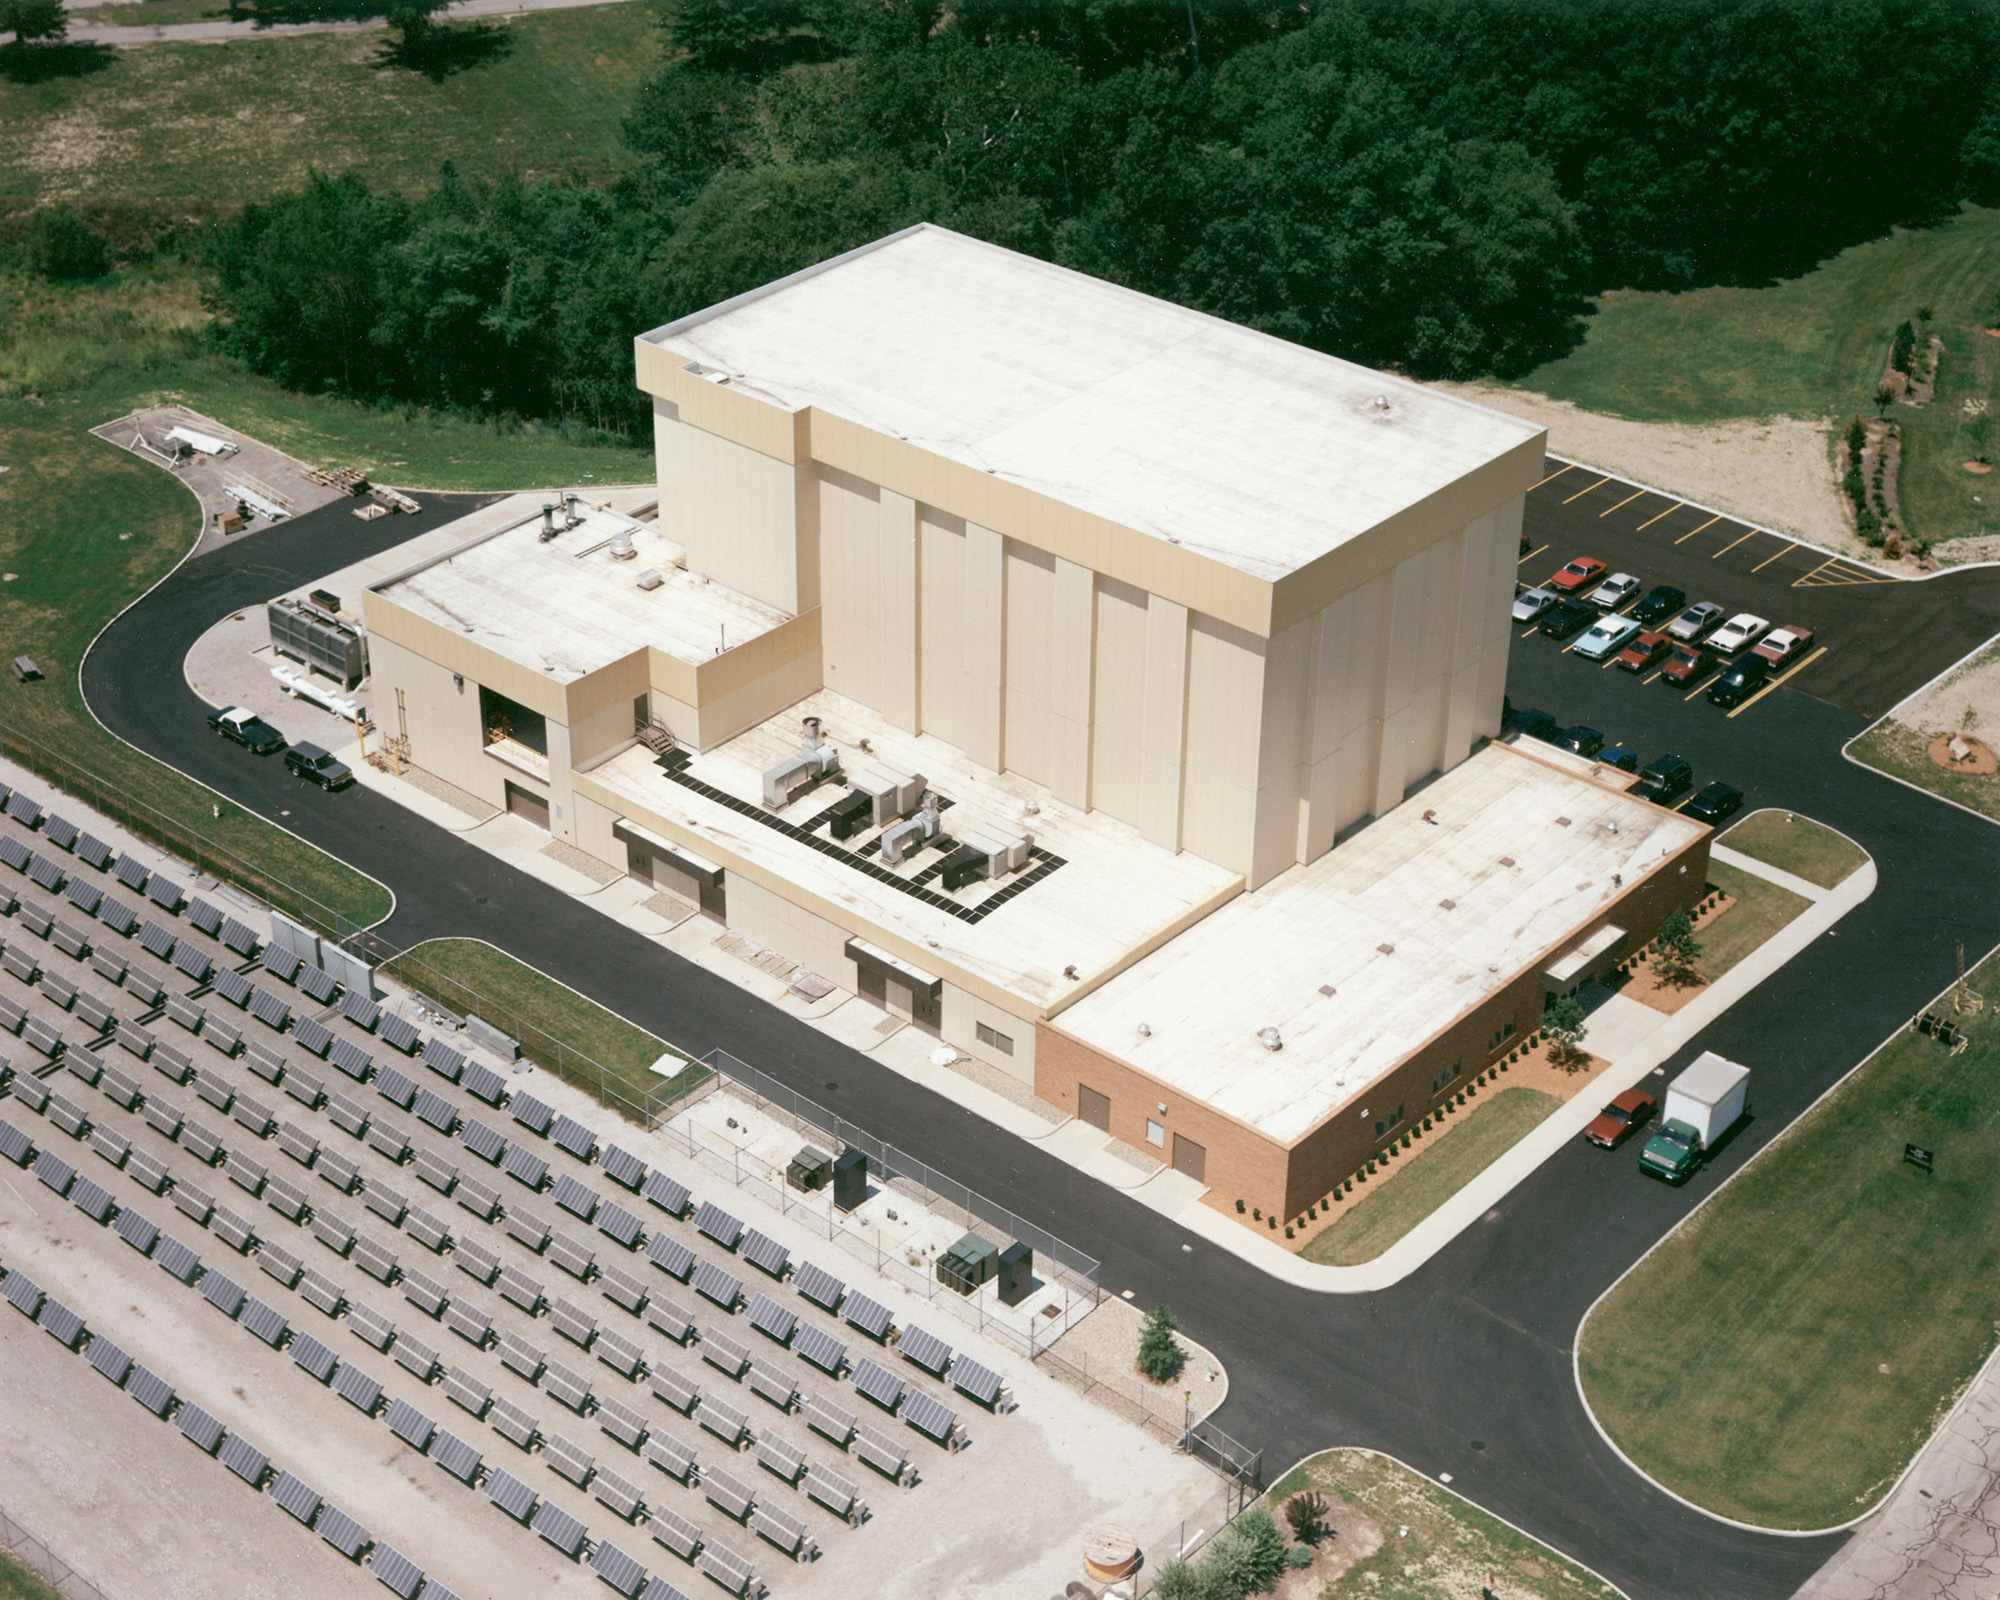 Illustration of aerial view of test facility, parking lot, and solar panels.